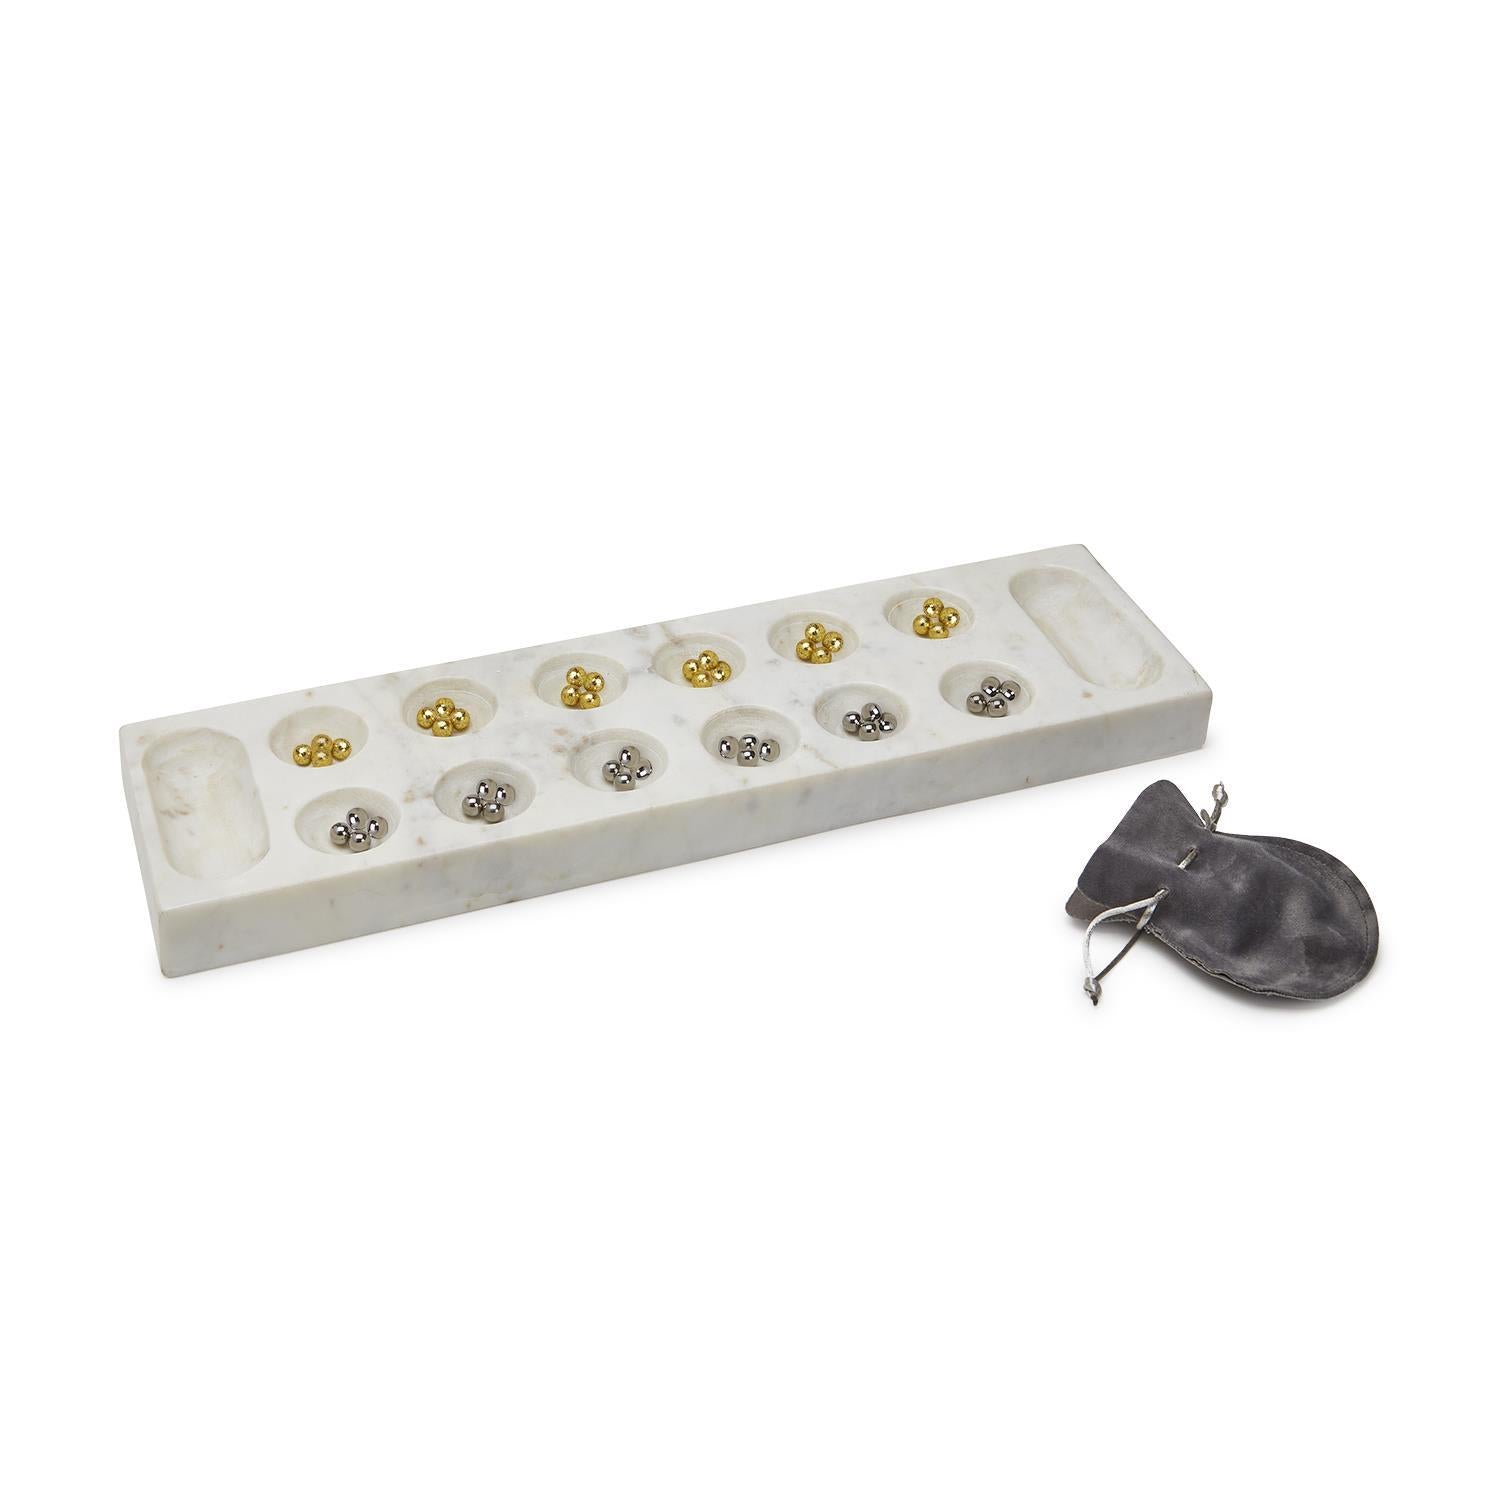 Mancala Game Board and Pieces